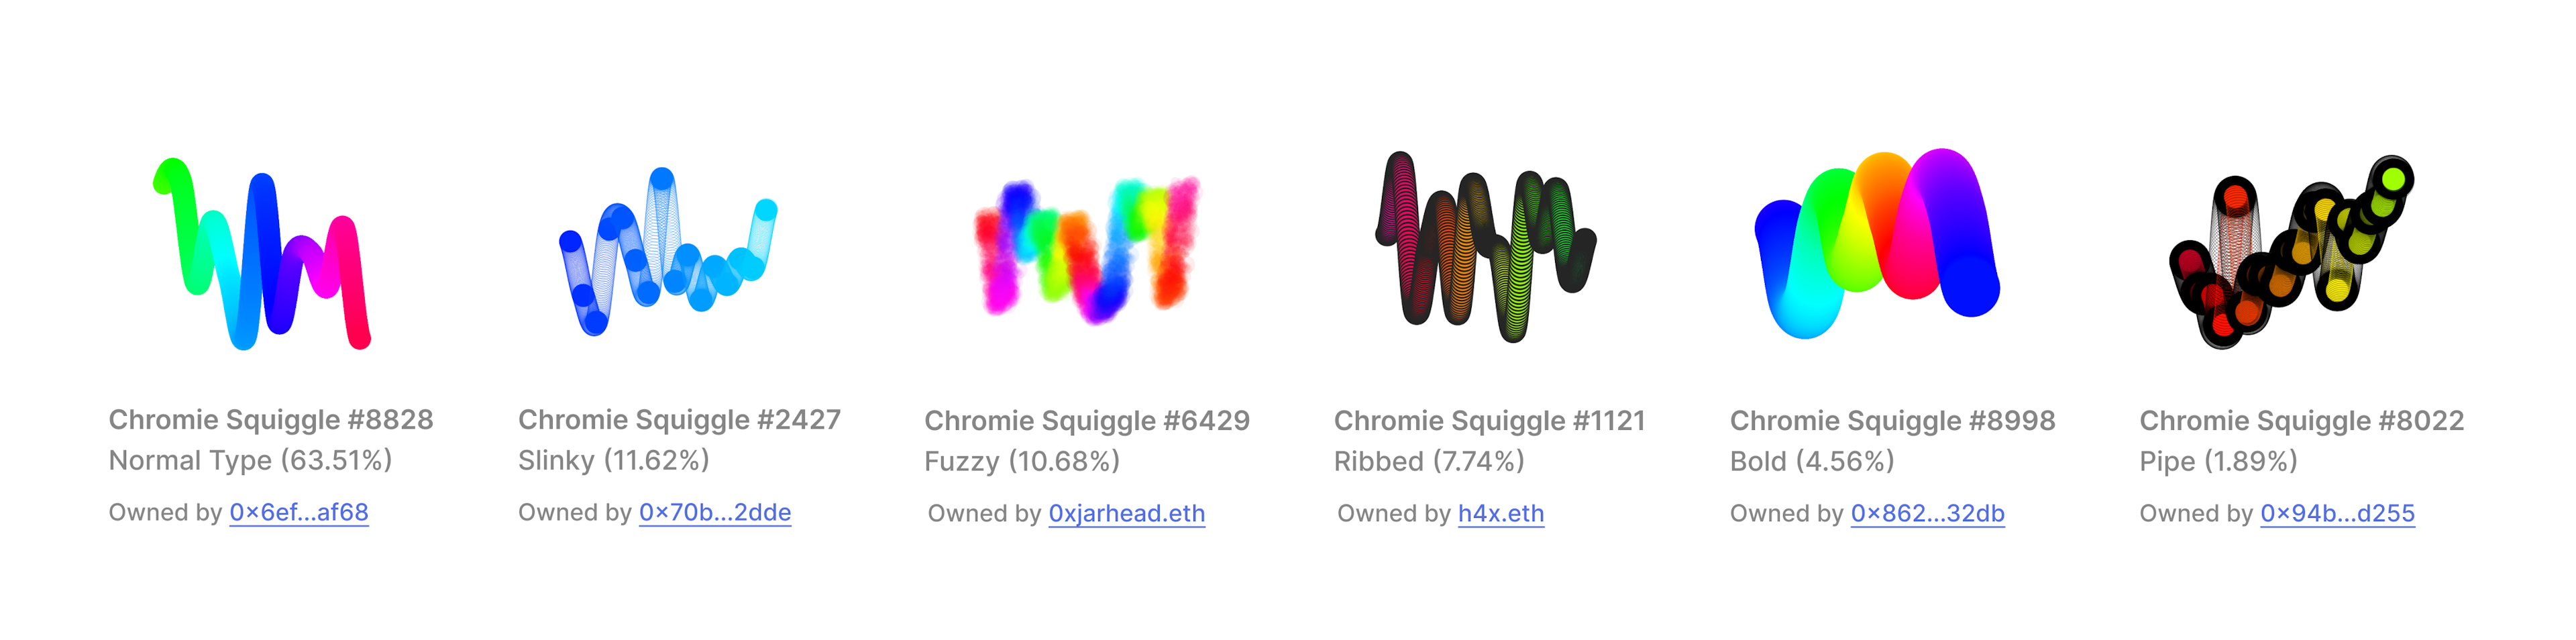 Six Types of Chromie Squiggle